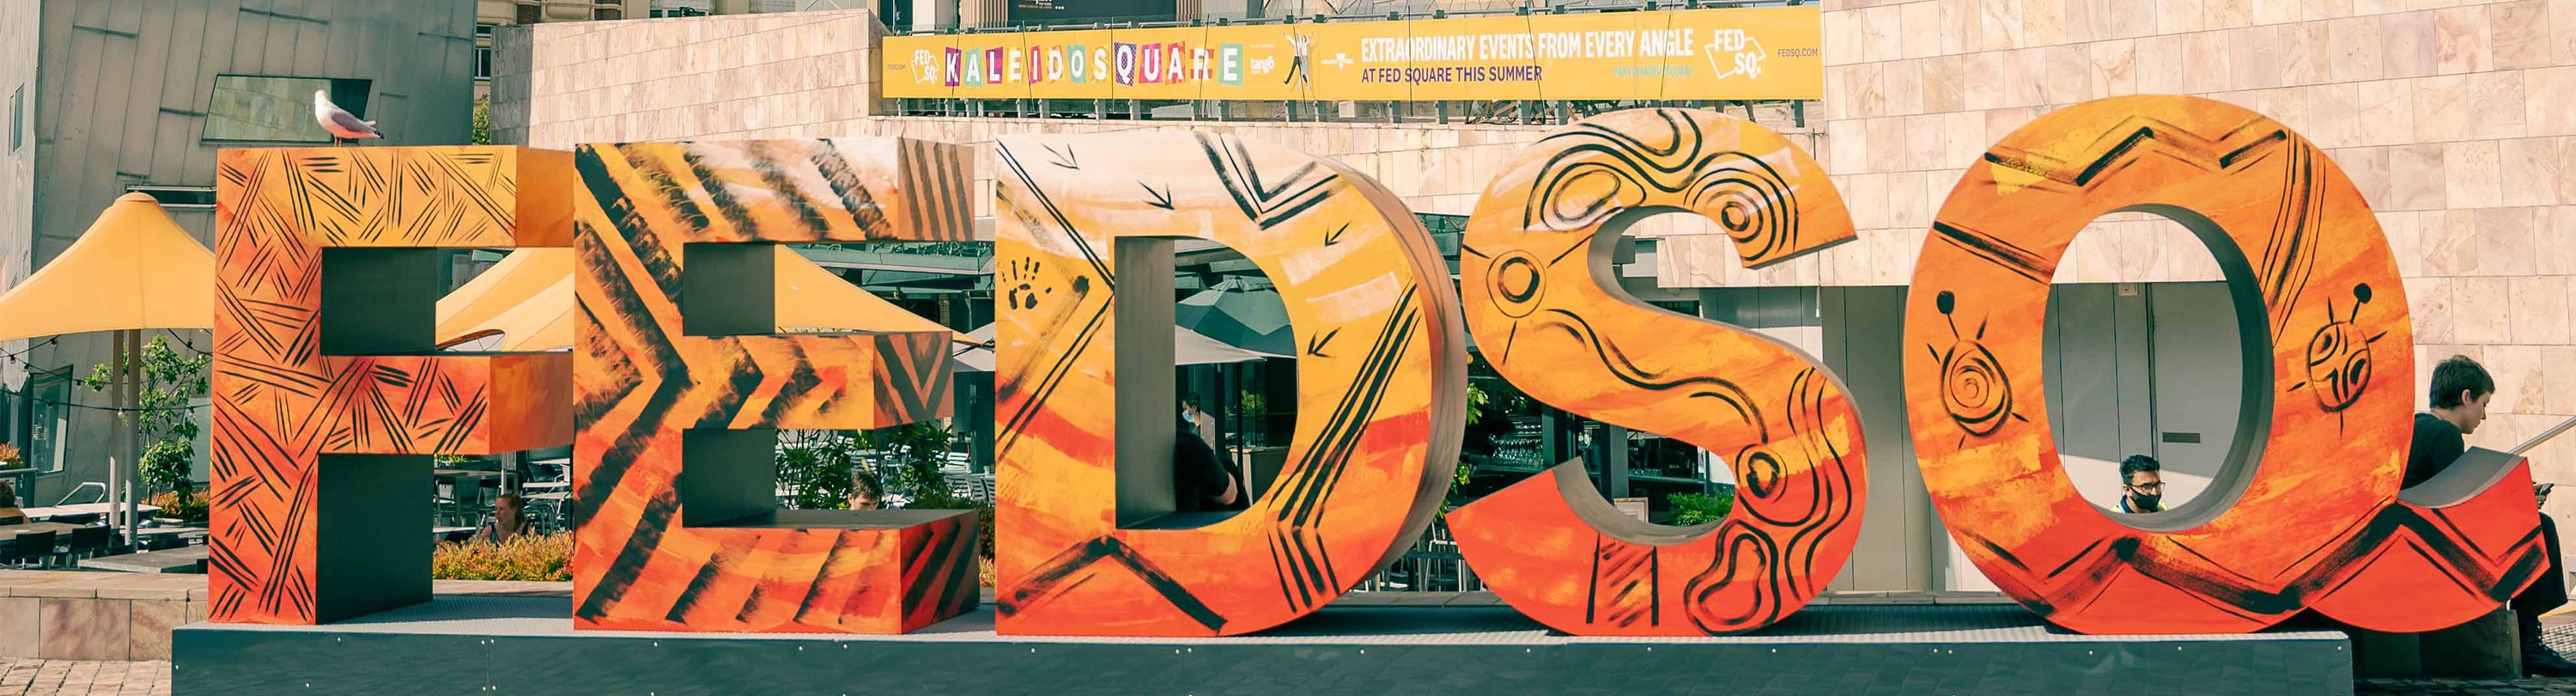 The Fed Square letters have been painted in a yellow and orange colour depicting the Creator spirit, Bunjil by First Nations artist Robert Michael Young